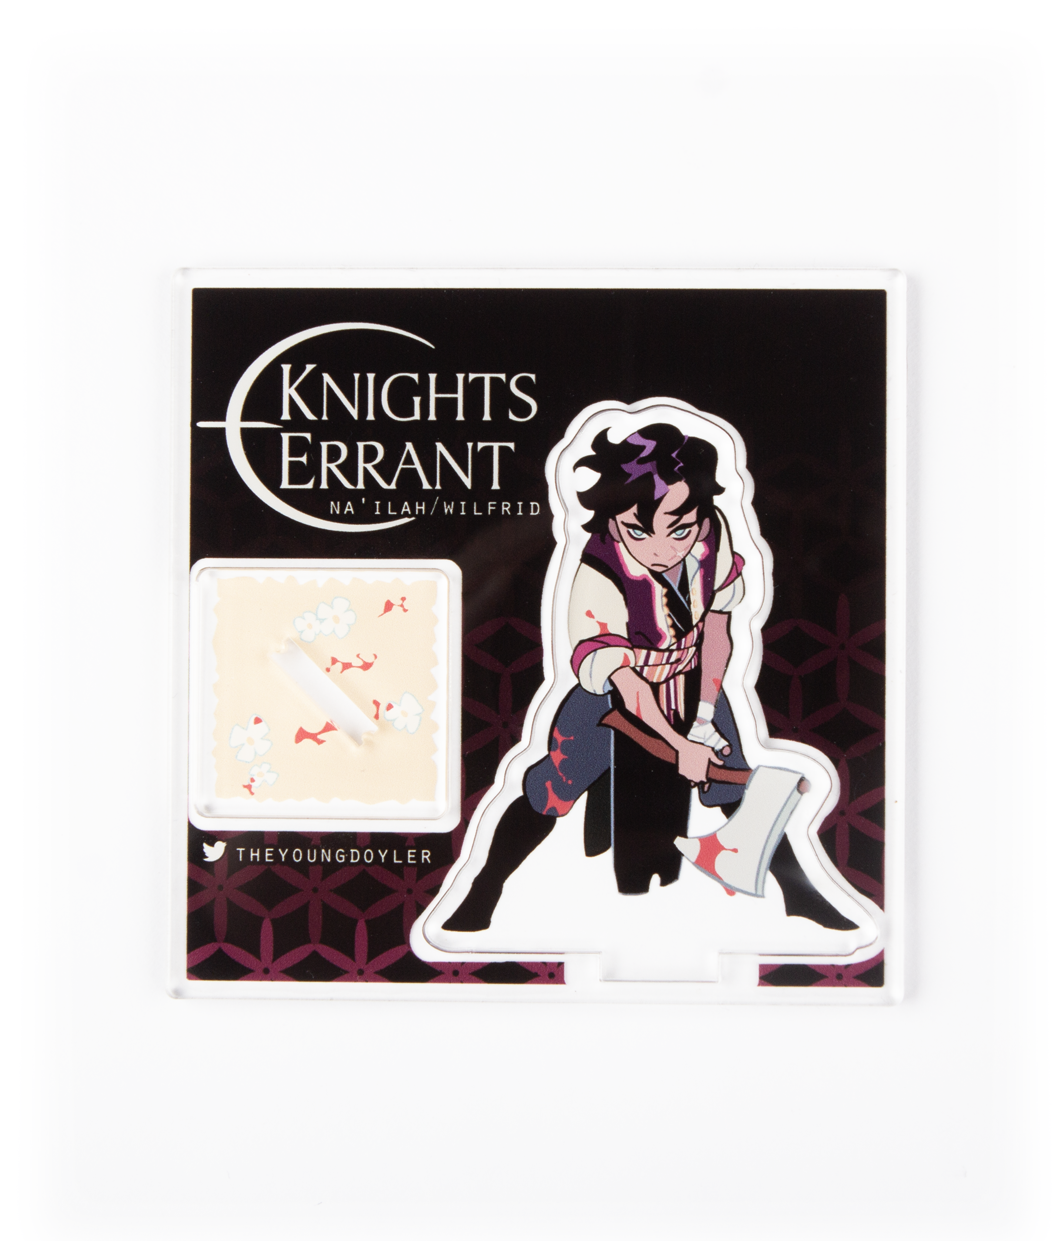 A standee of a person holding an axe with blood on it in a backing that says "Knights Errant" on it. 